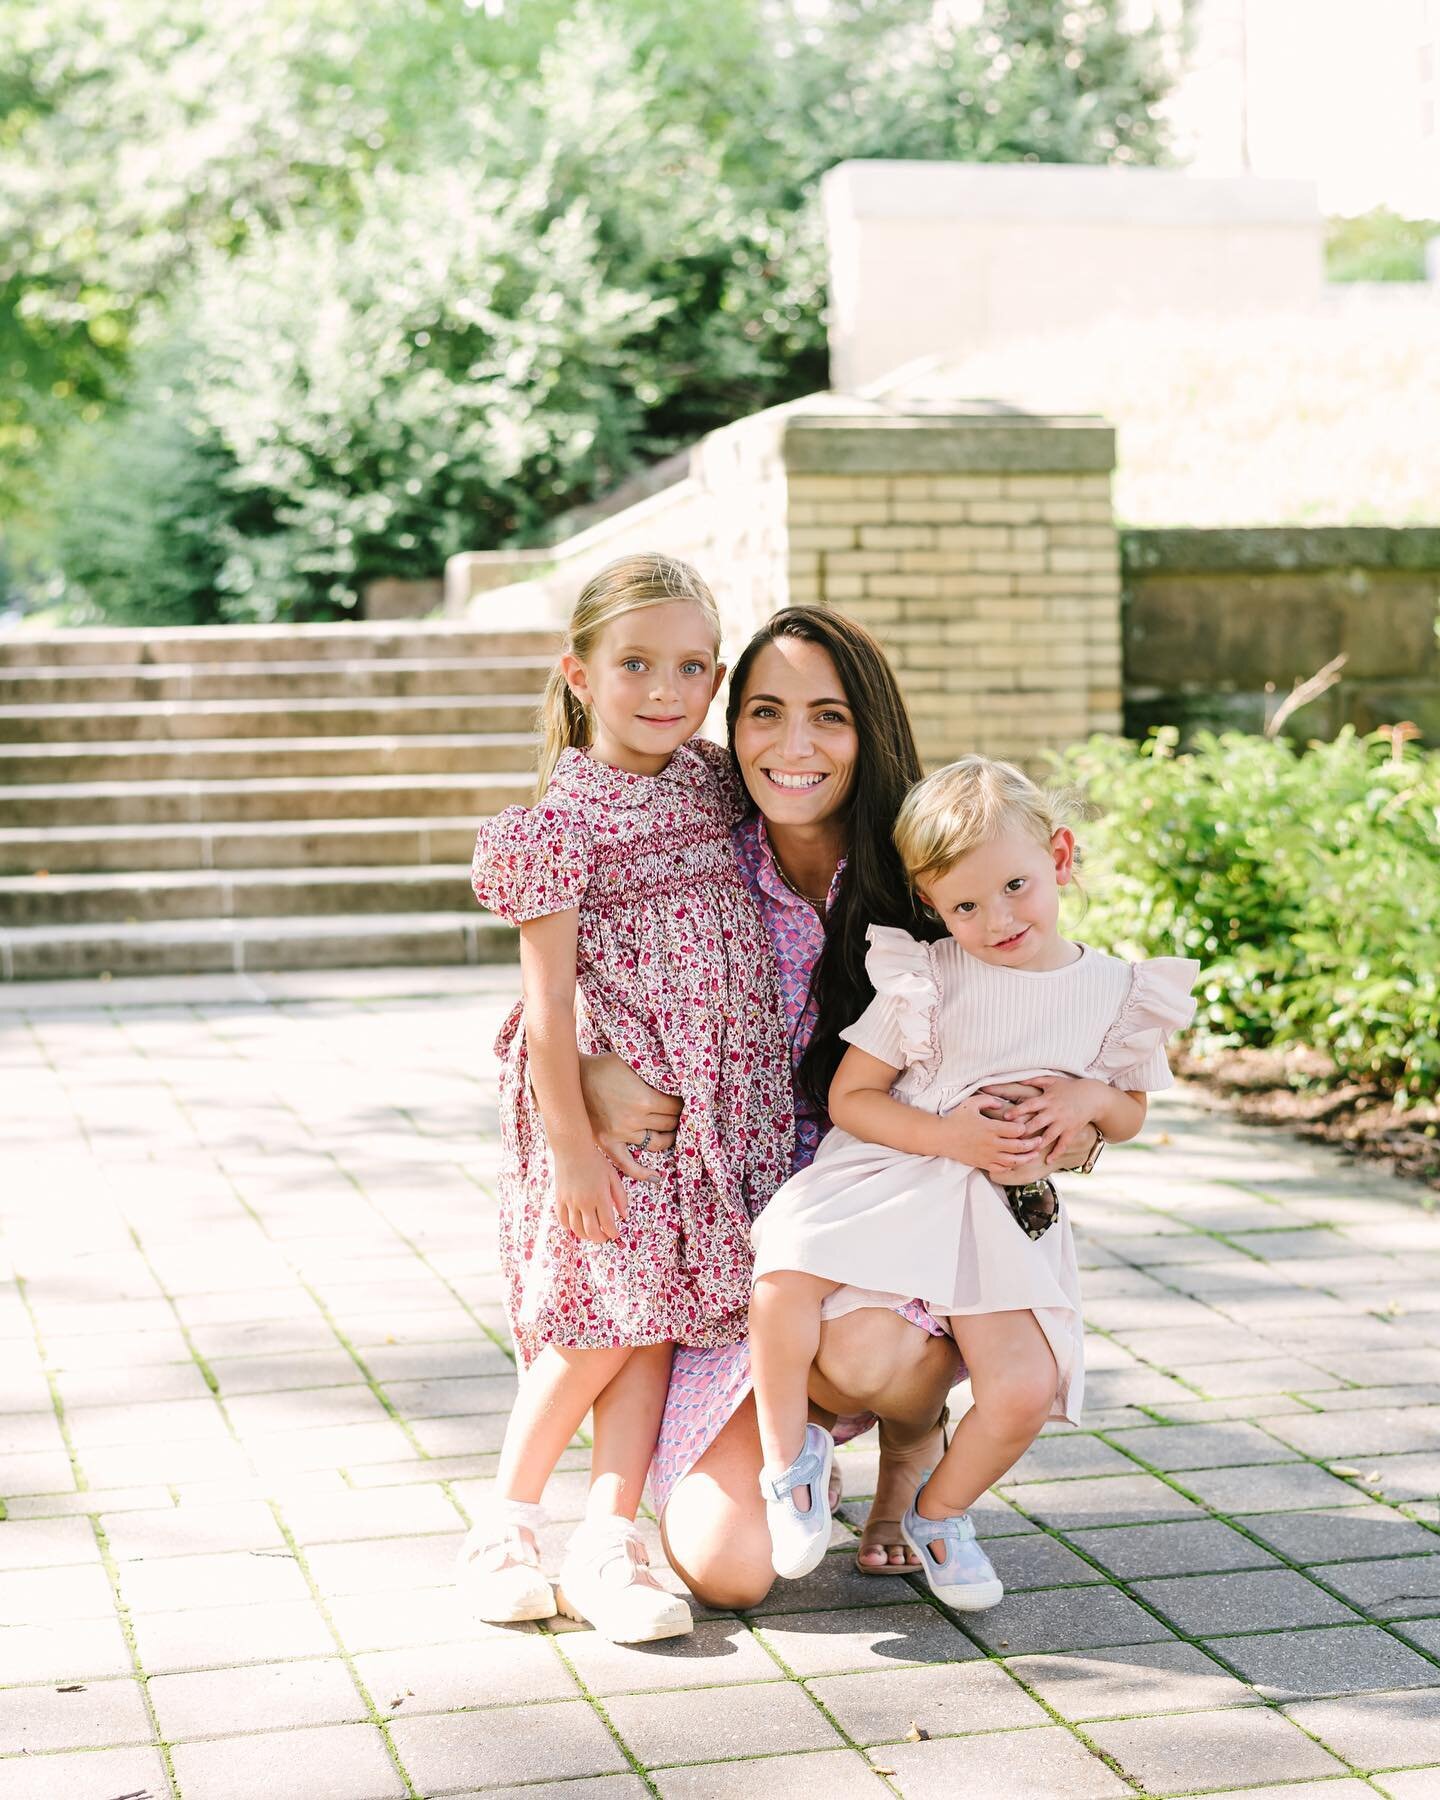 Introduction Tuesday! 
⠀⠀⠀⠀⠀⠀⠀⠀⠀
I&rsquo;m Nicole, the face behind the lens! 
And these two are my pride and joy - Elliana and Avery 🤍
⠀⠀⠀⠀⠀⠀⠀⠀⠀
Which is why when we did a little &lsquo;back to school&rsquo; shoot yesterday I willed myself into a ph